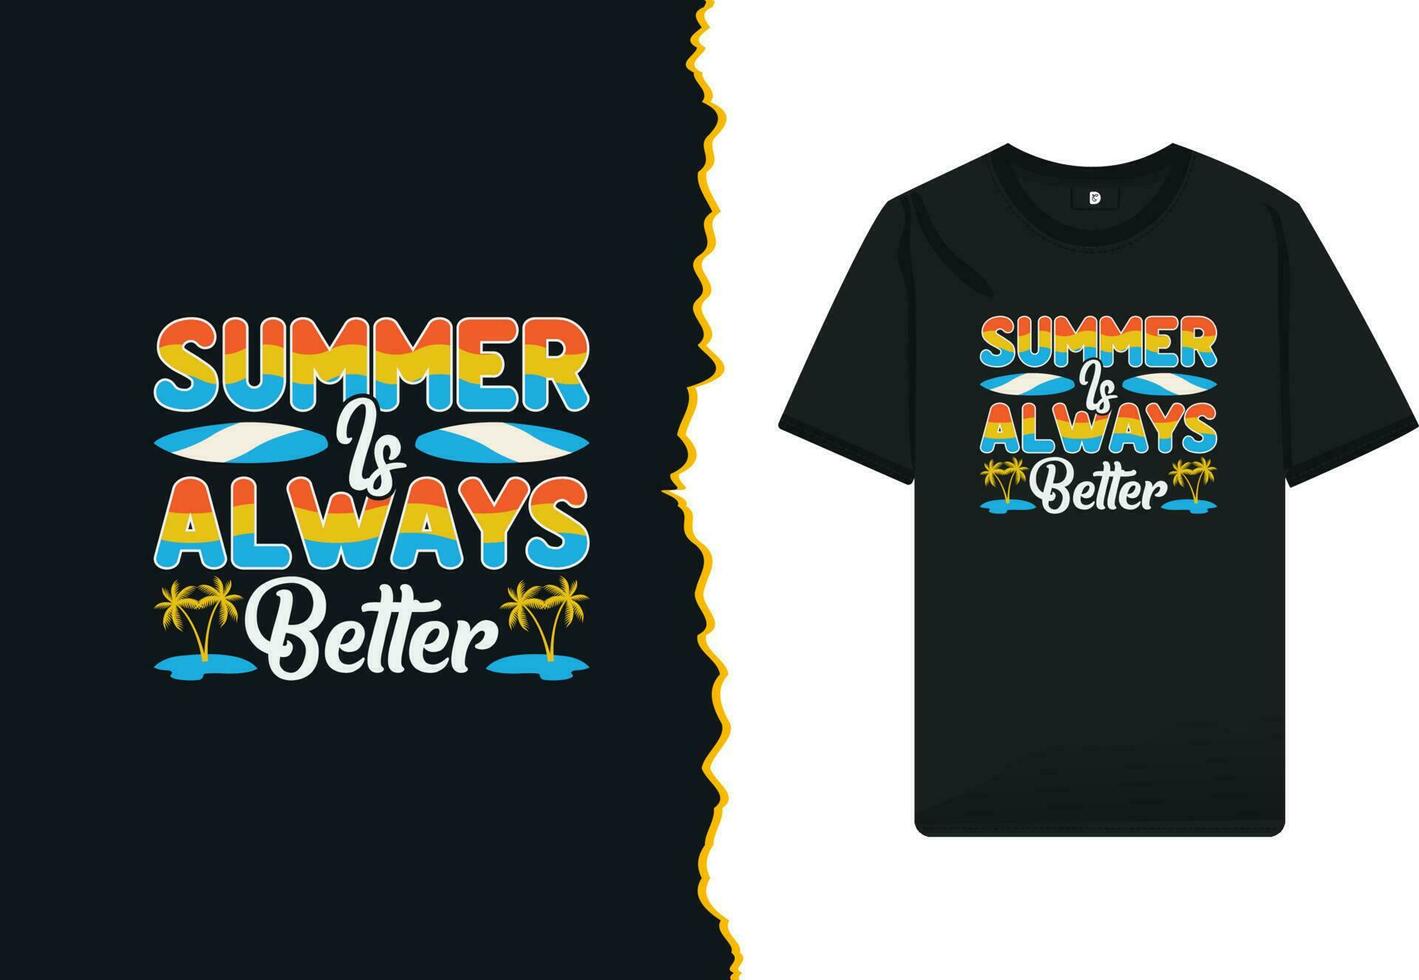 Vintage Retro-style Summer Typography T-shirt Design Template. Design quote - Summer is always better. vector